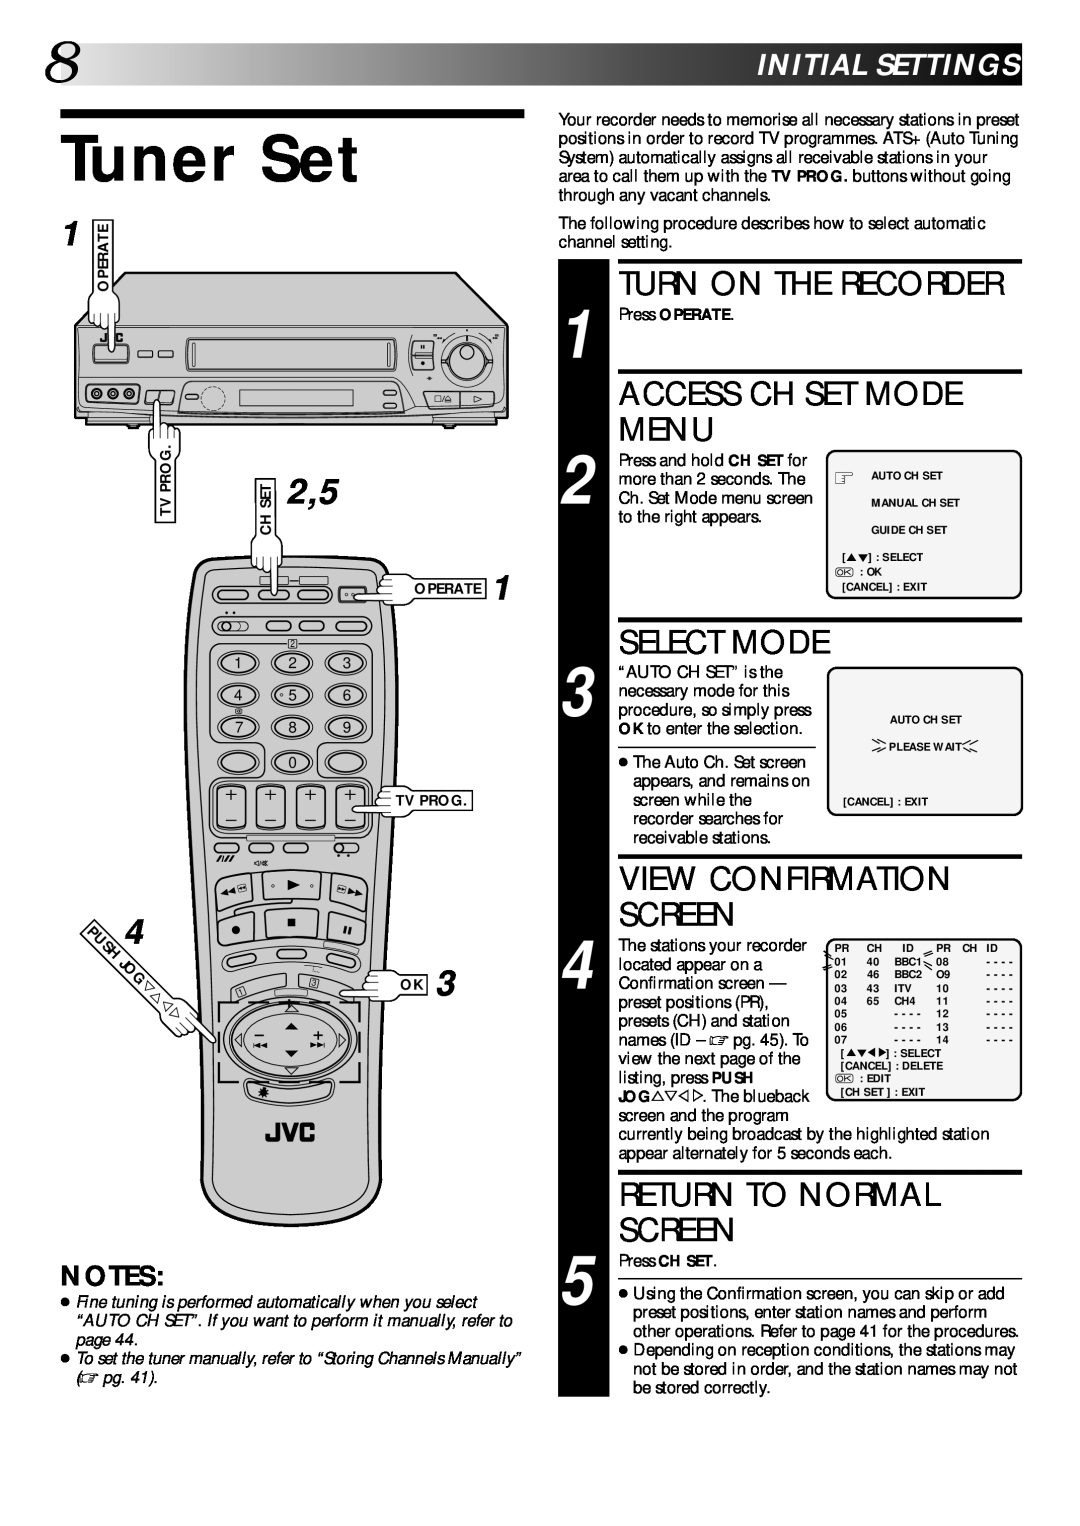 JVC PU30425 Tuner Set, Turn On The Recorder, Access Ch Set Mode, Menu, View Confirmation, Screen, Return To Normal 